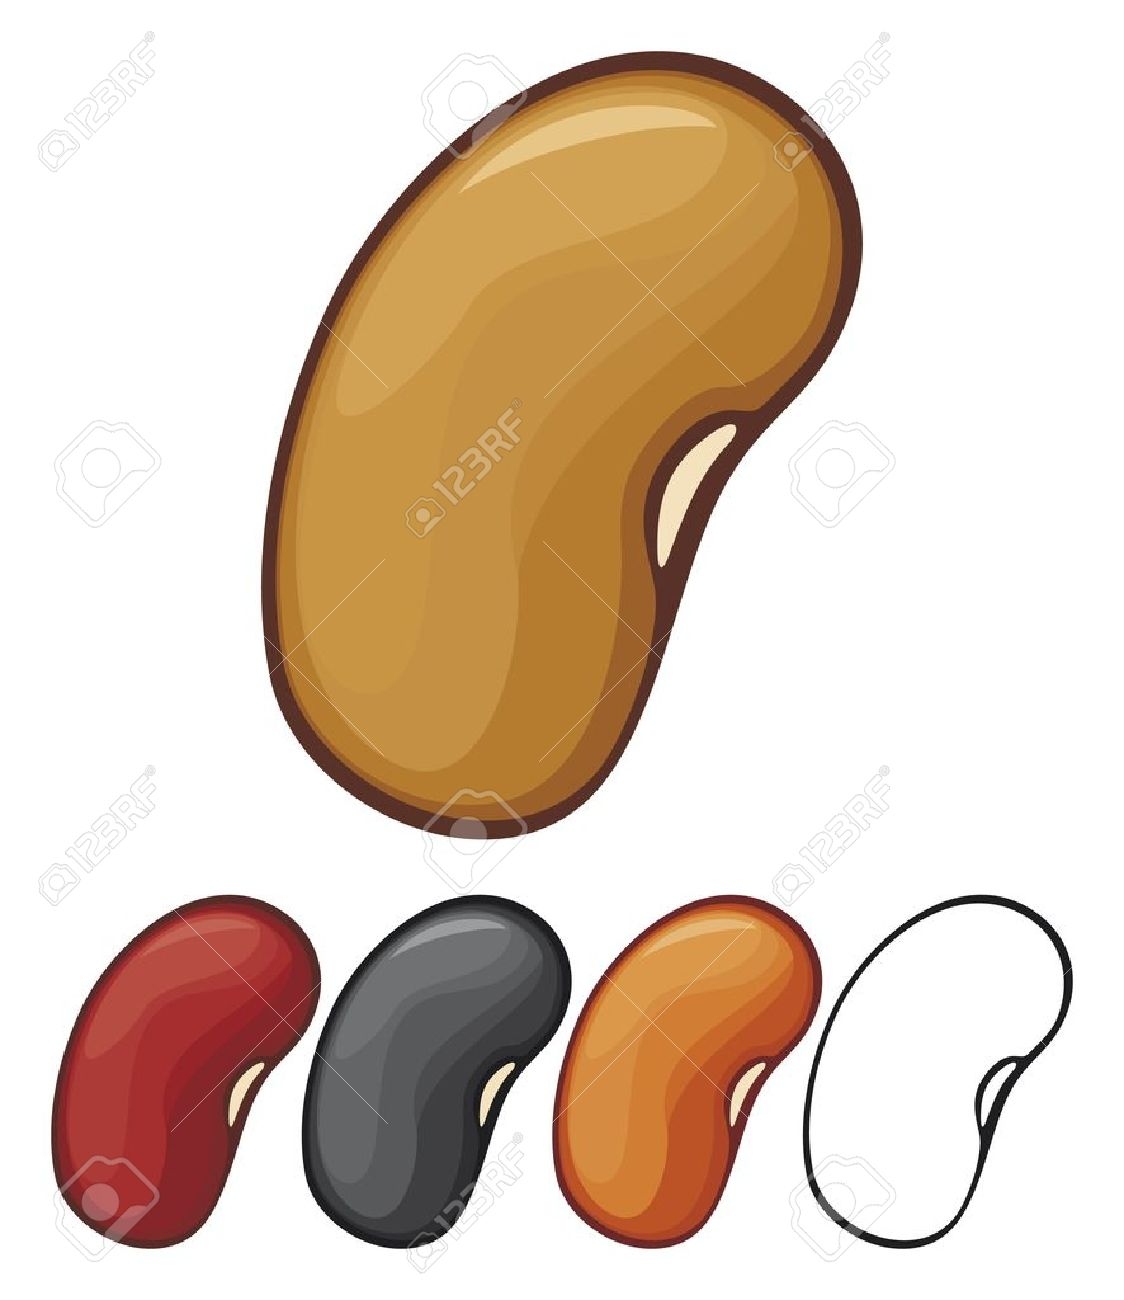 Bean clipart nuts. Unique seeds collection digital